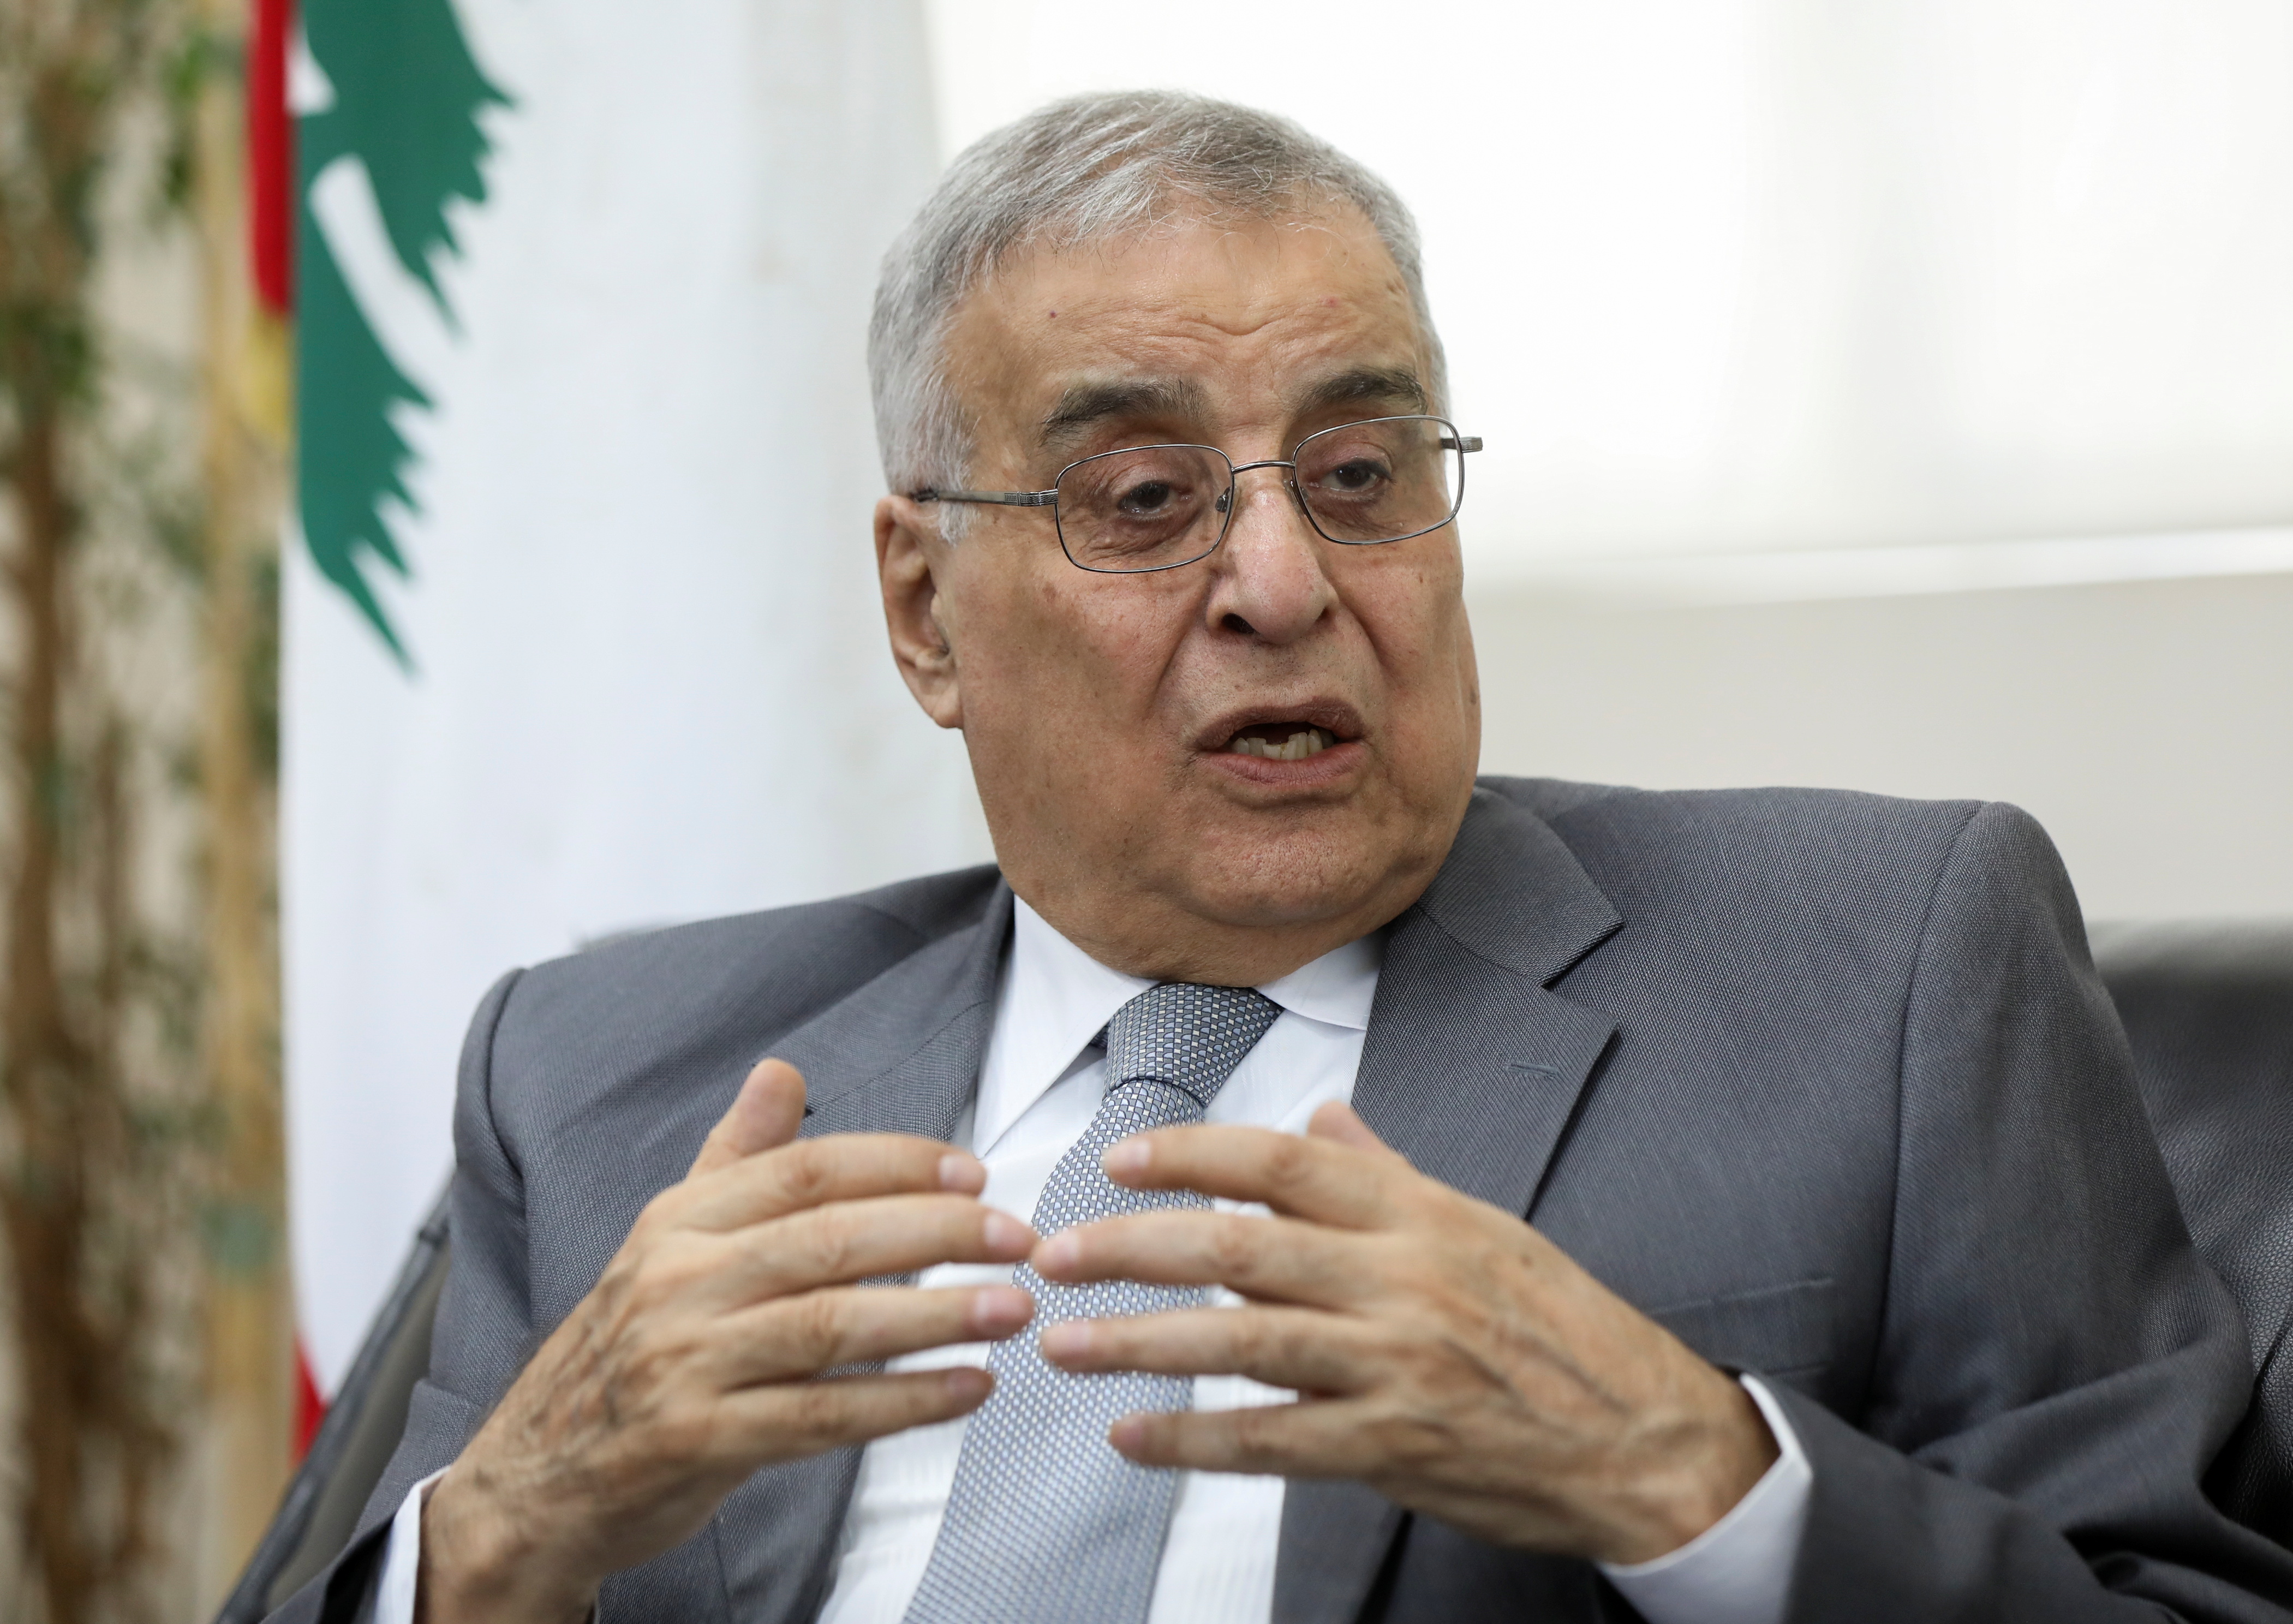 Lebanese Foreign Minister Abdallah Bou Habib gestures as he speaks during an interview with Reuters in Beirut